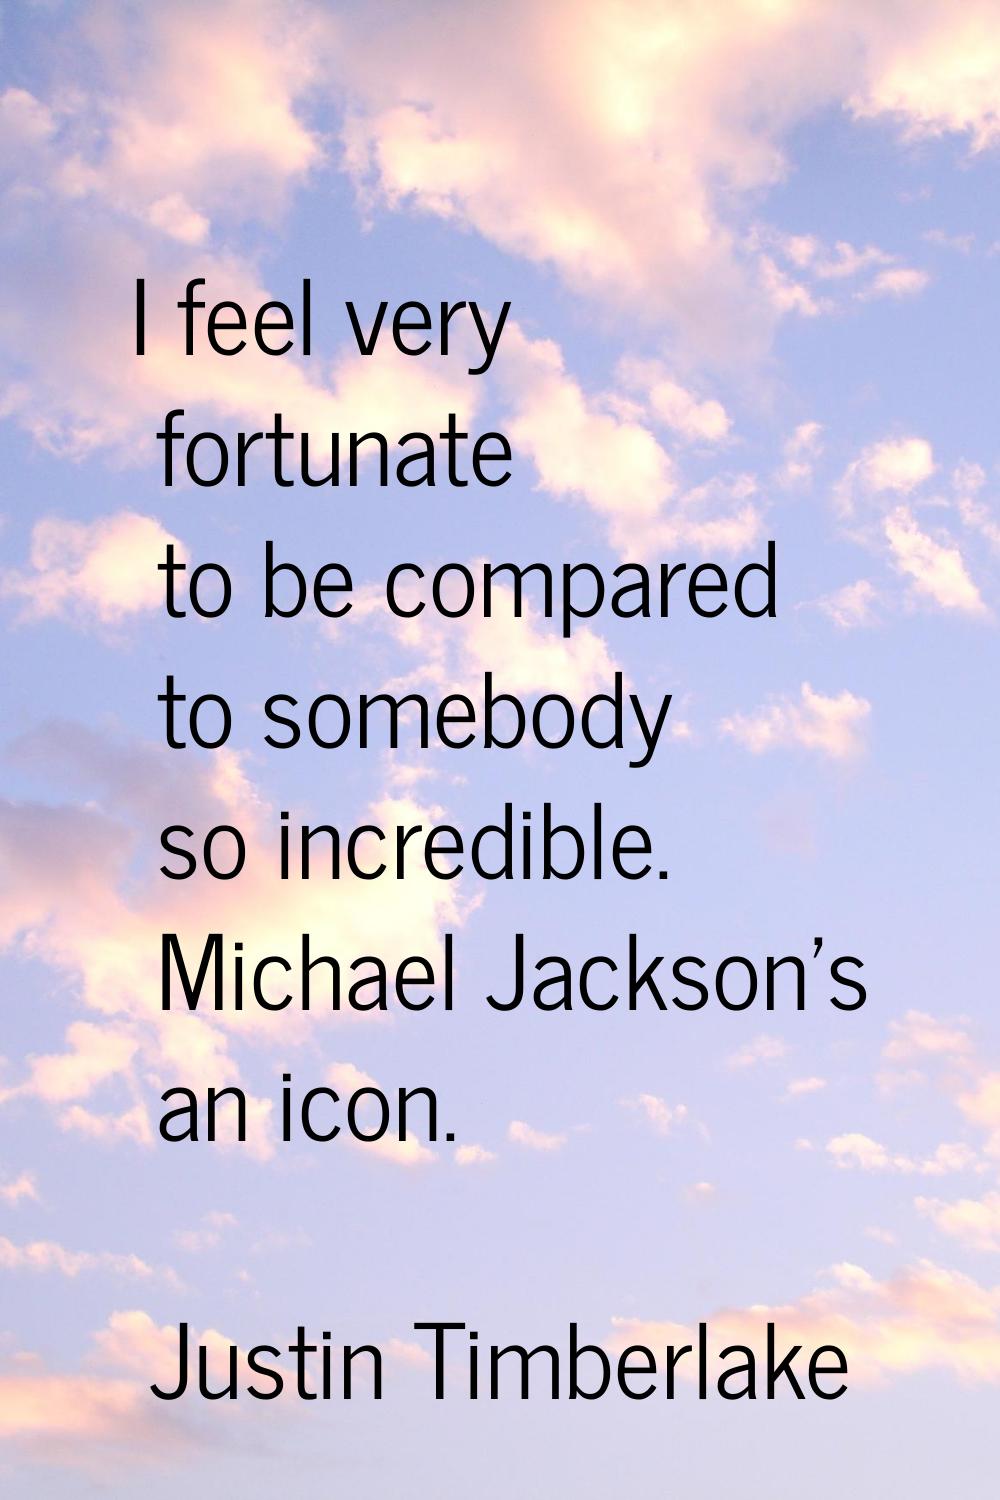 I feel very fortunate to be compared to somebody so incredible. Michael Jackson's an icon.